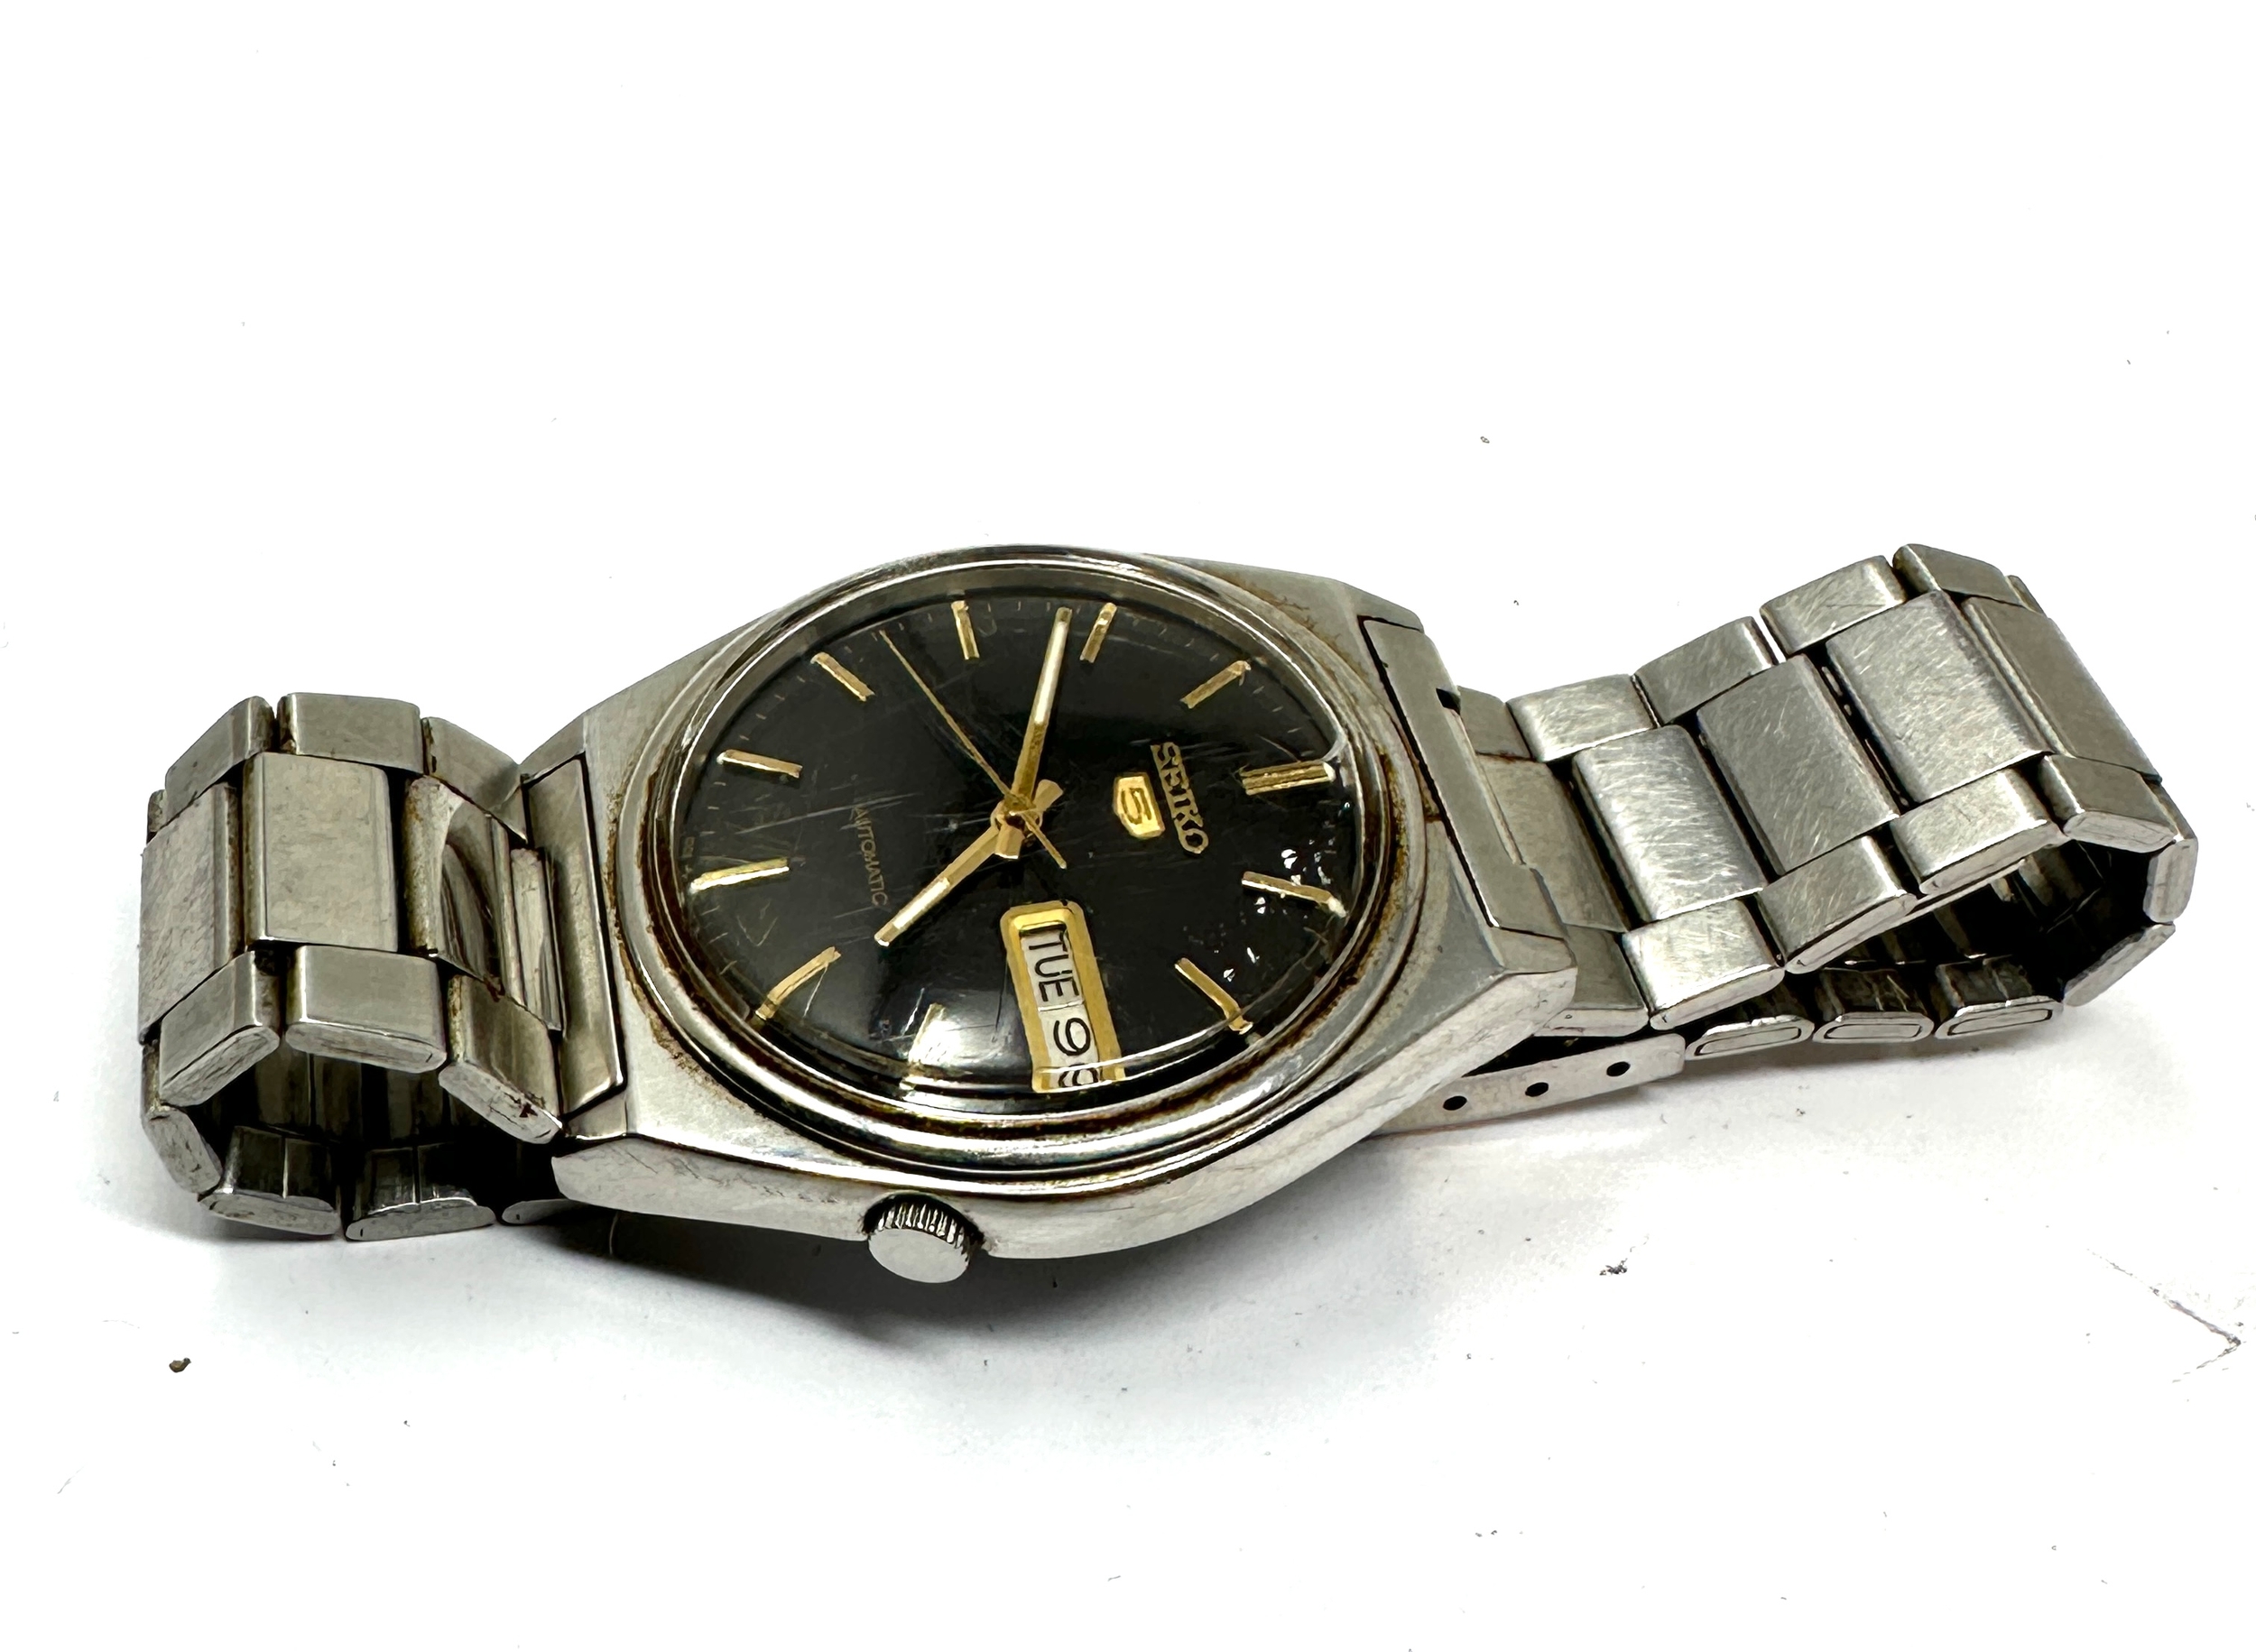 Vintage Seiko 5 Automatic Day & Date 7009 -3140 the watch is ticking black dial - Image 2 of 5